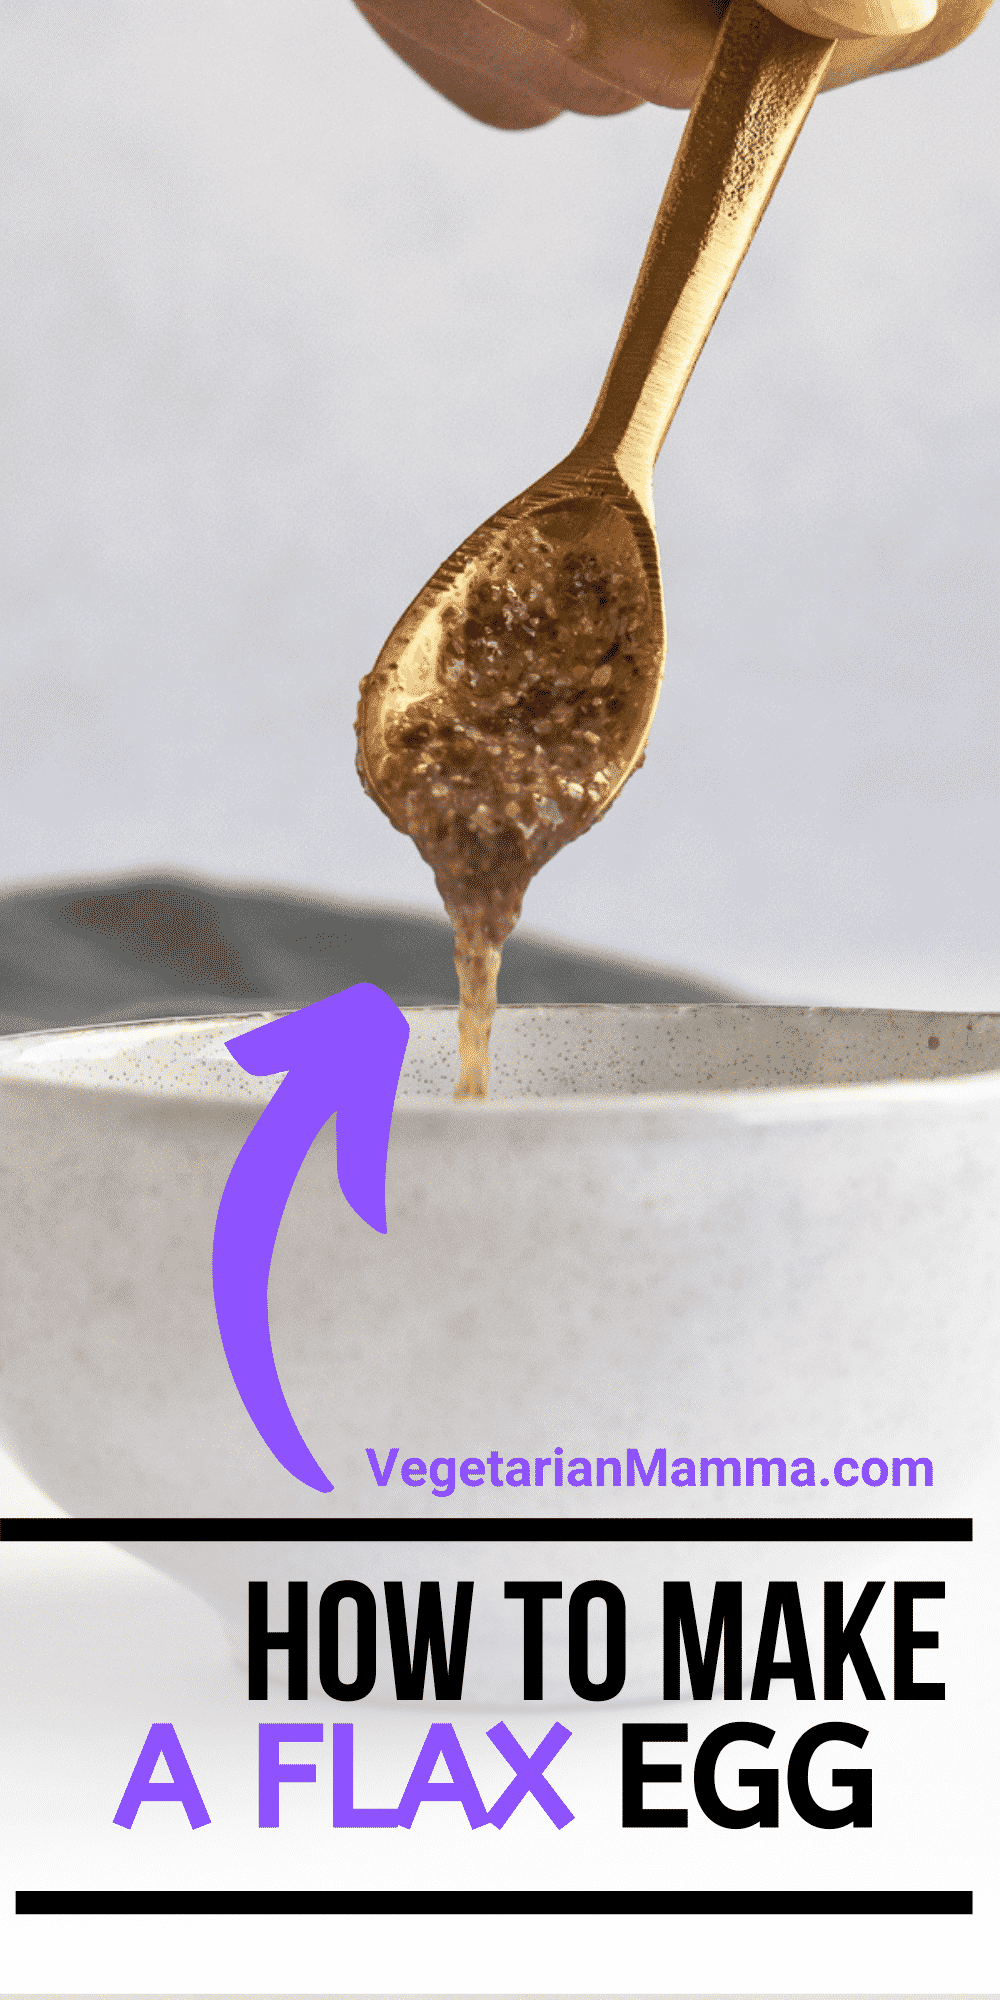 Vegan flax egg dripping off a gold spoon into a white bowl with an arrow and overlay text